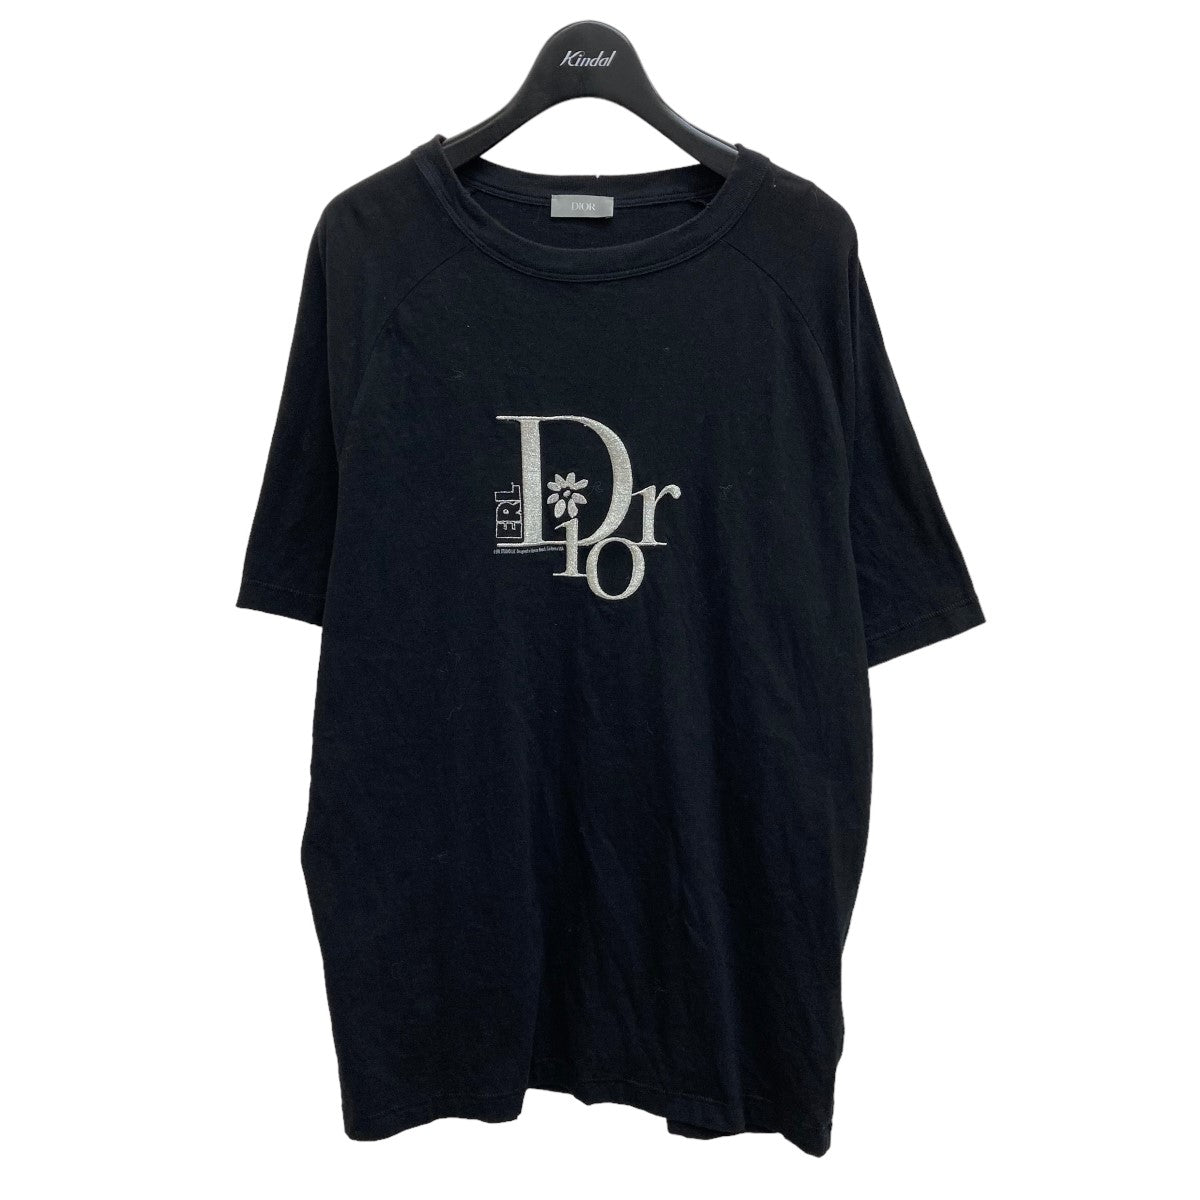 Dior(ディオール) ×ERL 23SS Relaxed Fit Tee 半袖Tシャツ